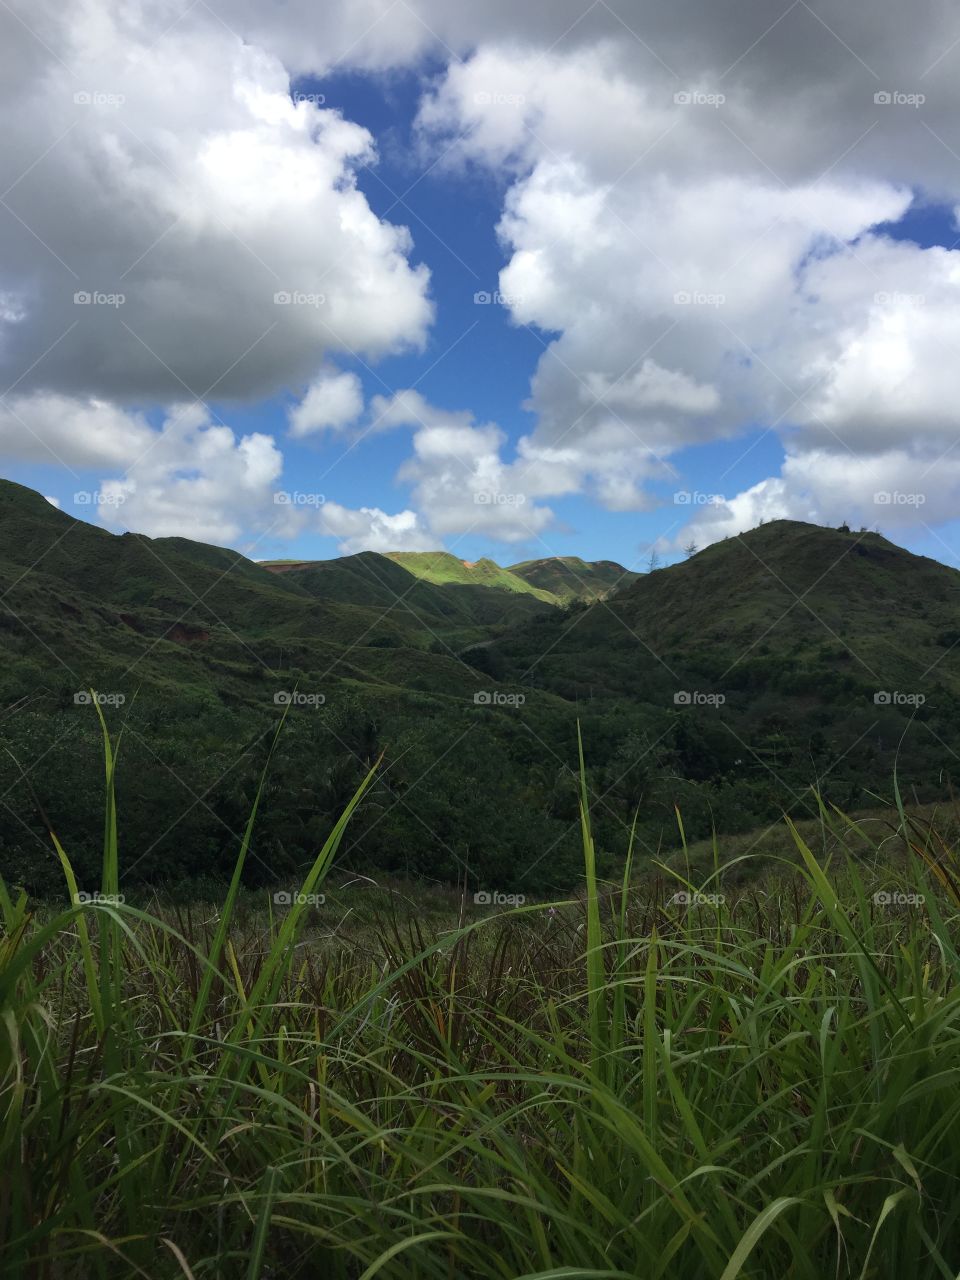 View looking up towards Mt. Lam Lam and Mt. Jumollong Manglo, from the hike towards Castro Bay - Guam